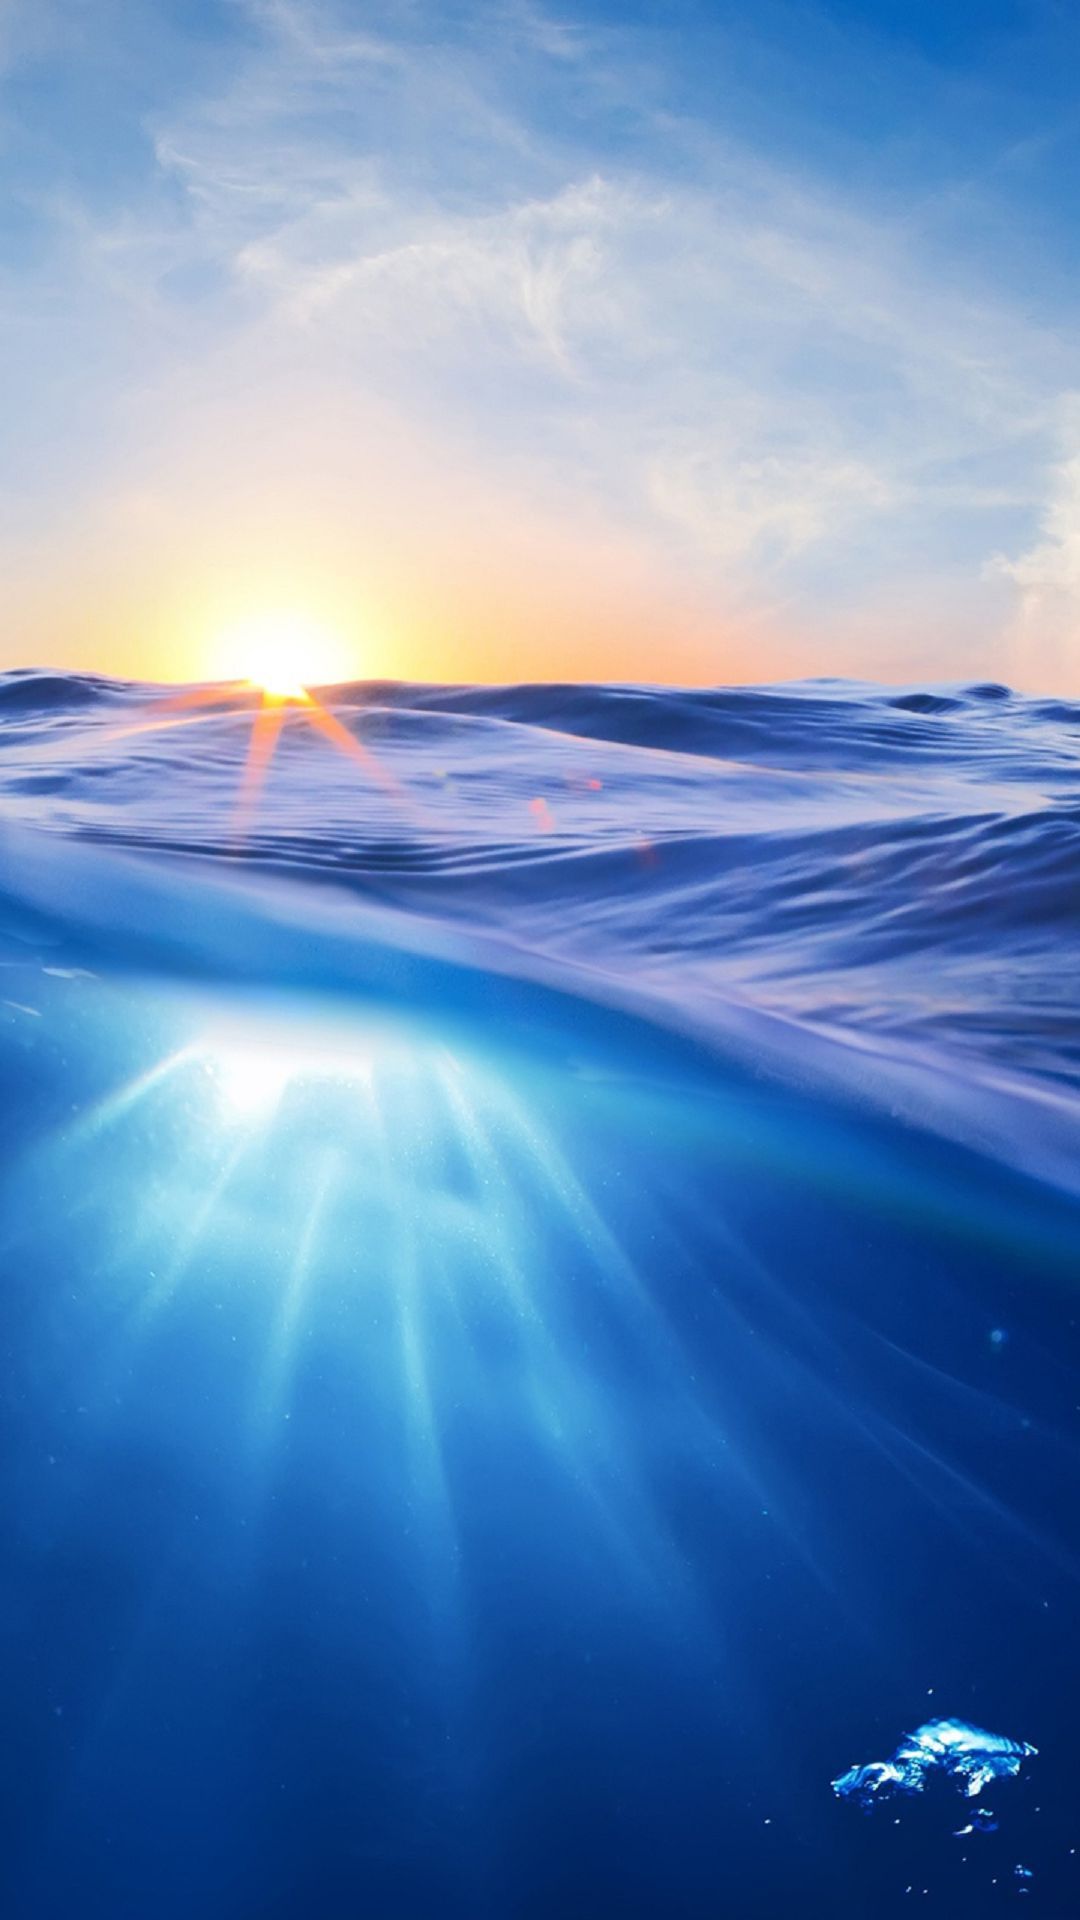 HD Sea Waves Sunrise Android Wallpaper free download